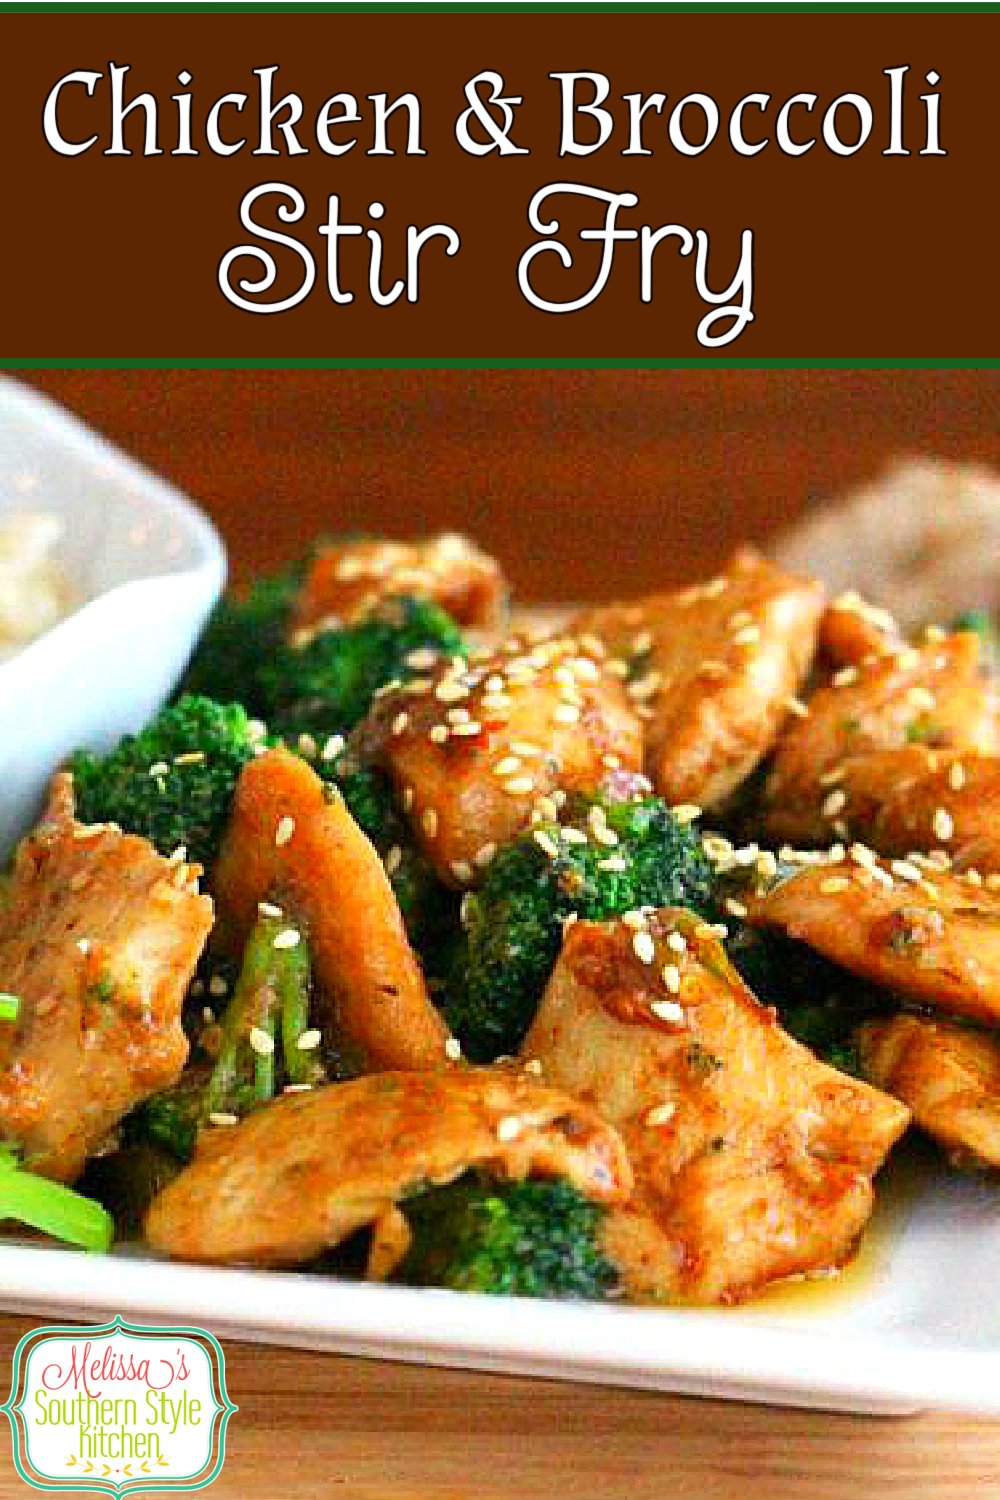 Skip the drive though and make this better than take-out Chicken and Broccoli Stir Fry #stirfry #chickenstirfry #chickenandbroccolistirfry #easychickenrecipes #asianchicken #asianinspired #chickenbreastrecipes #dinner #dinnerideas #southernfood #southernrecipes